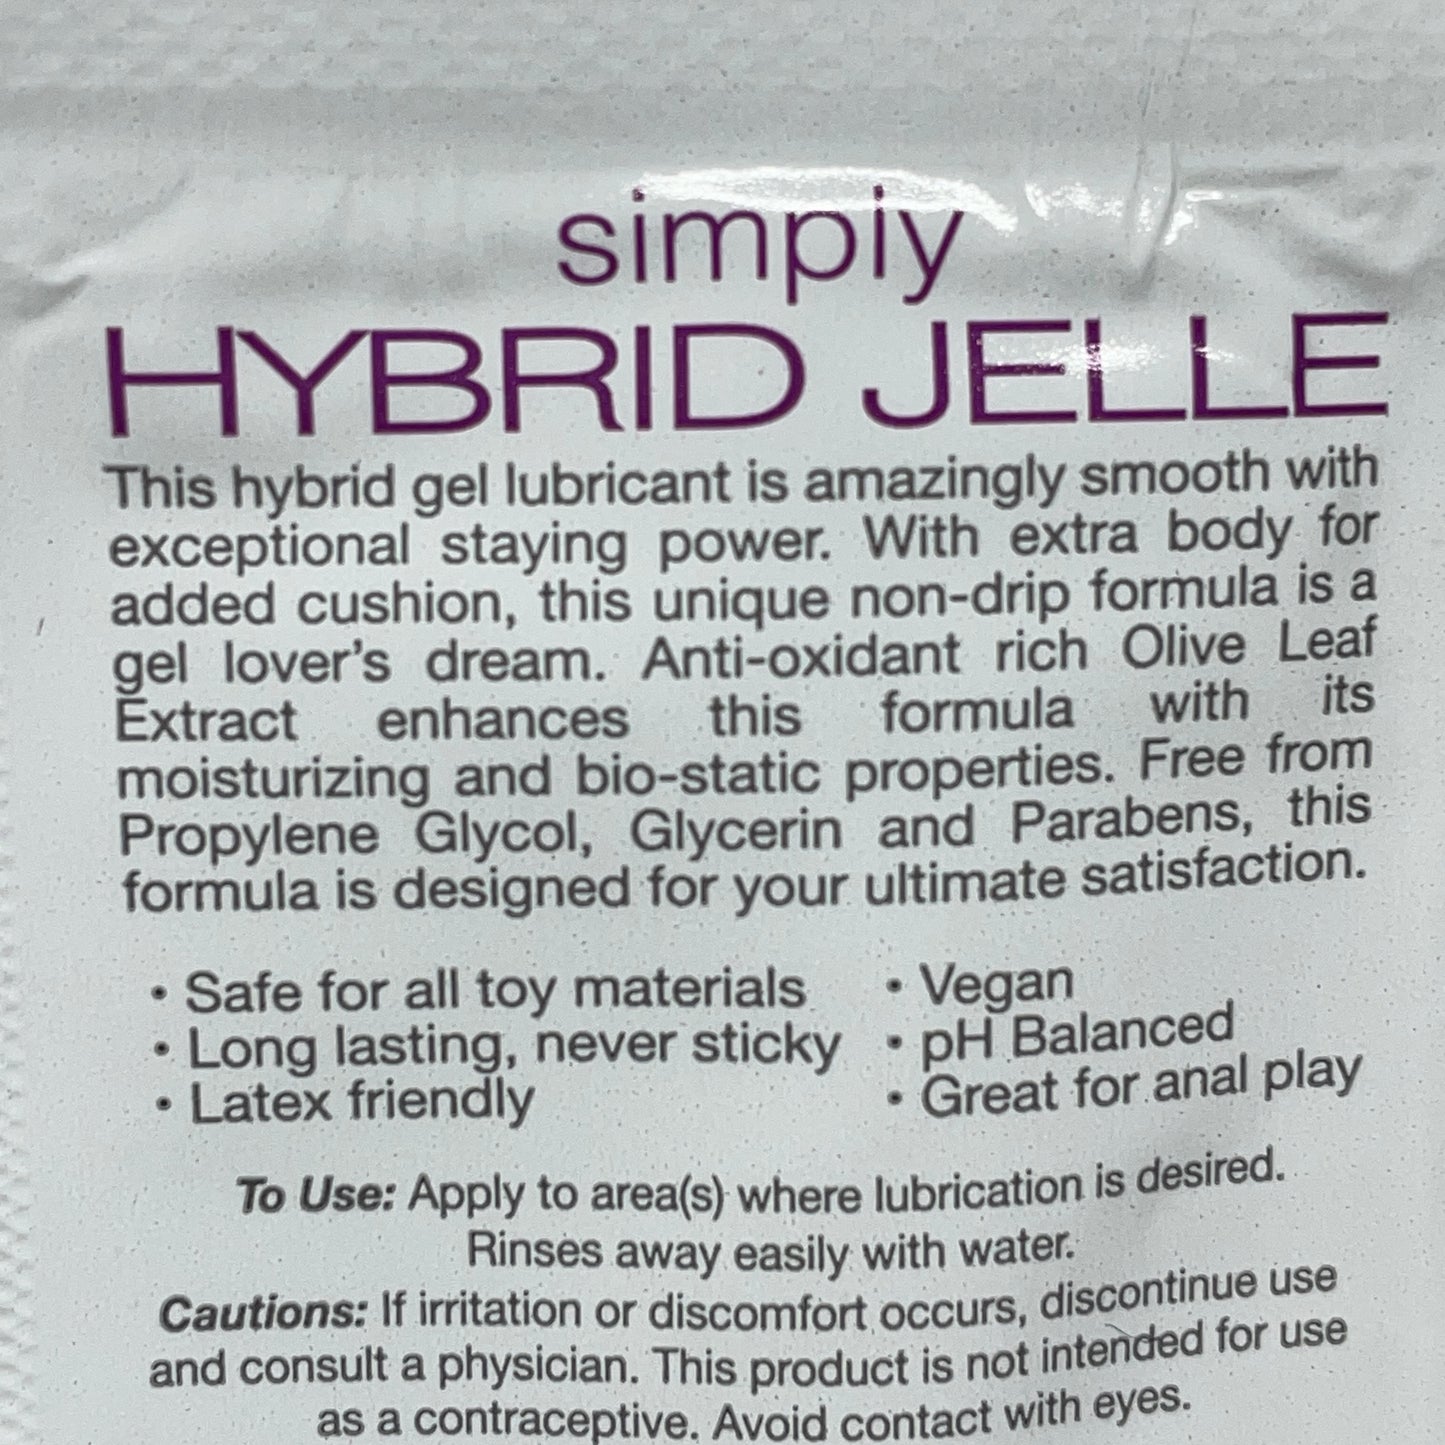 WICKED SENSUAL CARE 144-PACK Simply Hybrid Jelle Clean & Simple Water & Silicone Blended Gel Lubricant .1 oz Exp. 09/24 (New)